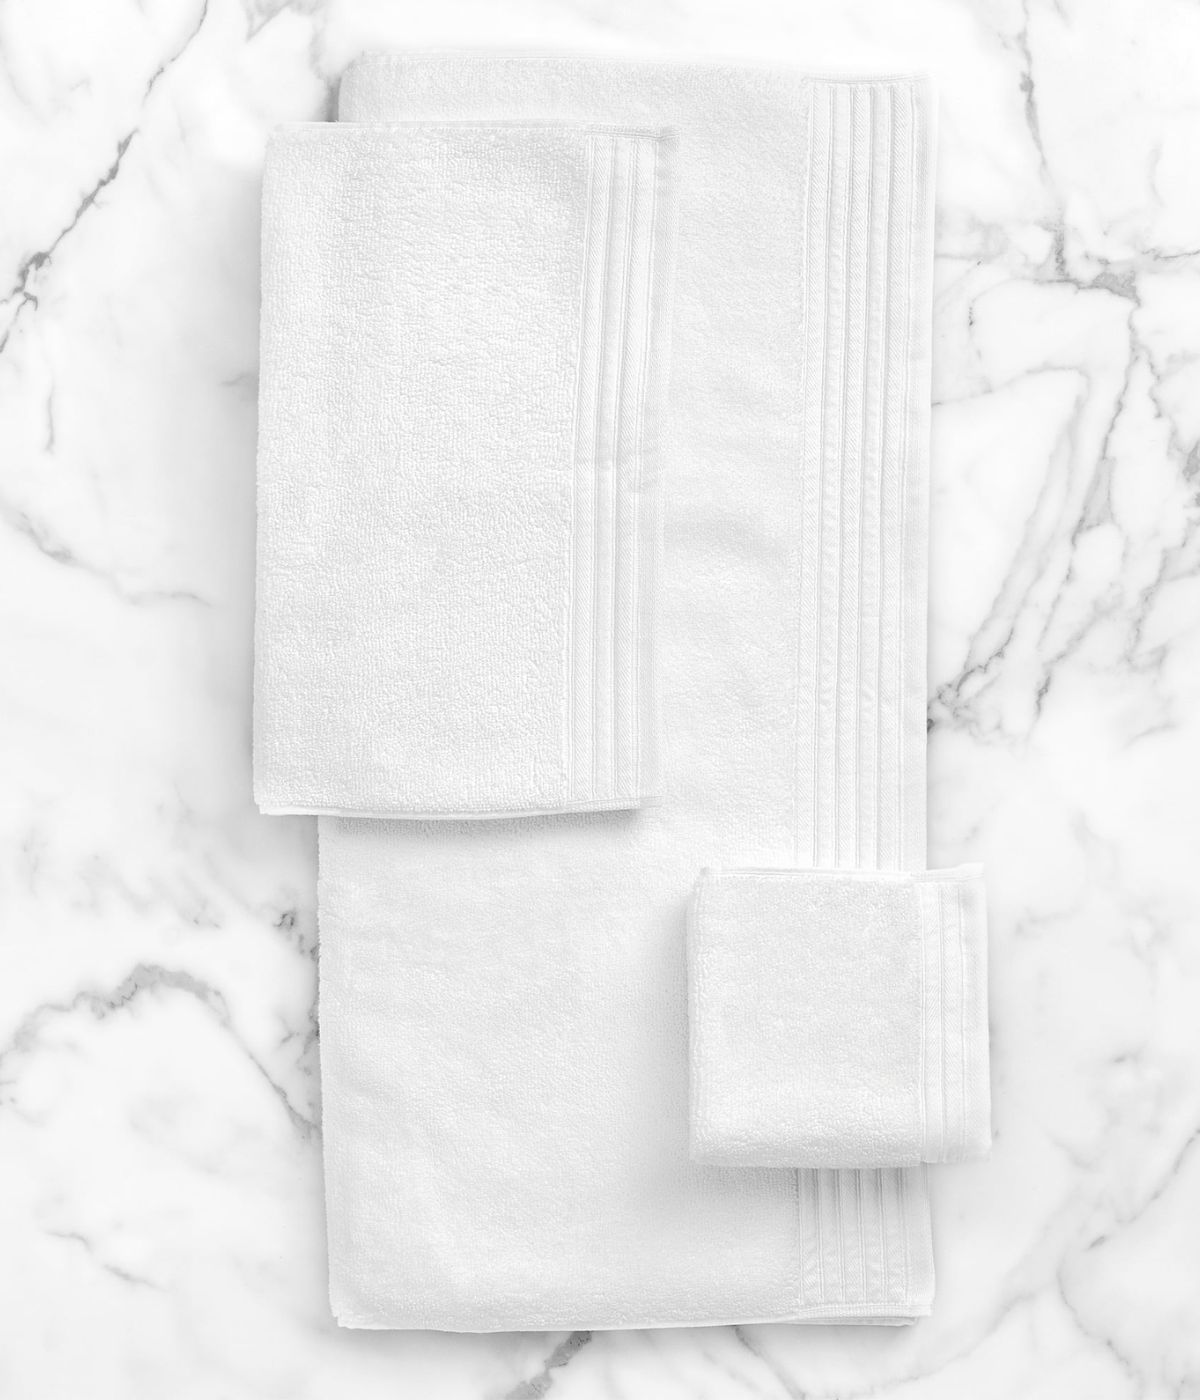 White hotel towels on a marble counter